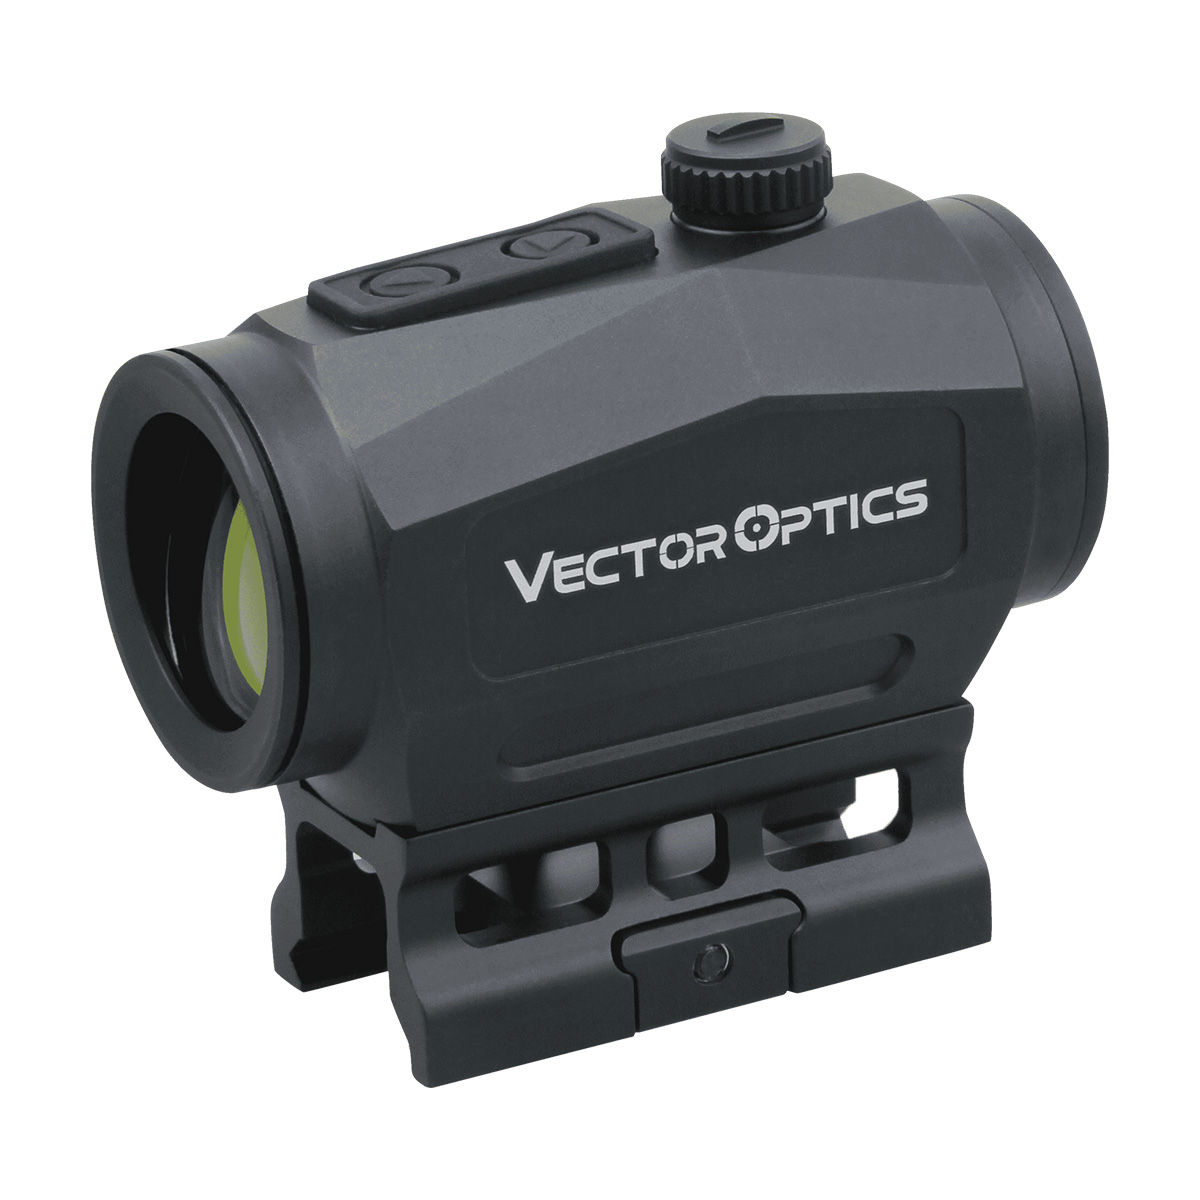 Vector Optics Scrapper 1x29mm Red Dot Scope | 20% Off w/ Free Shipping